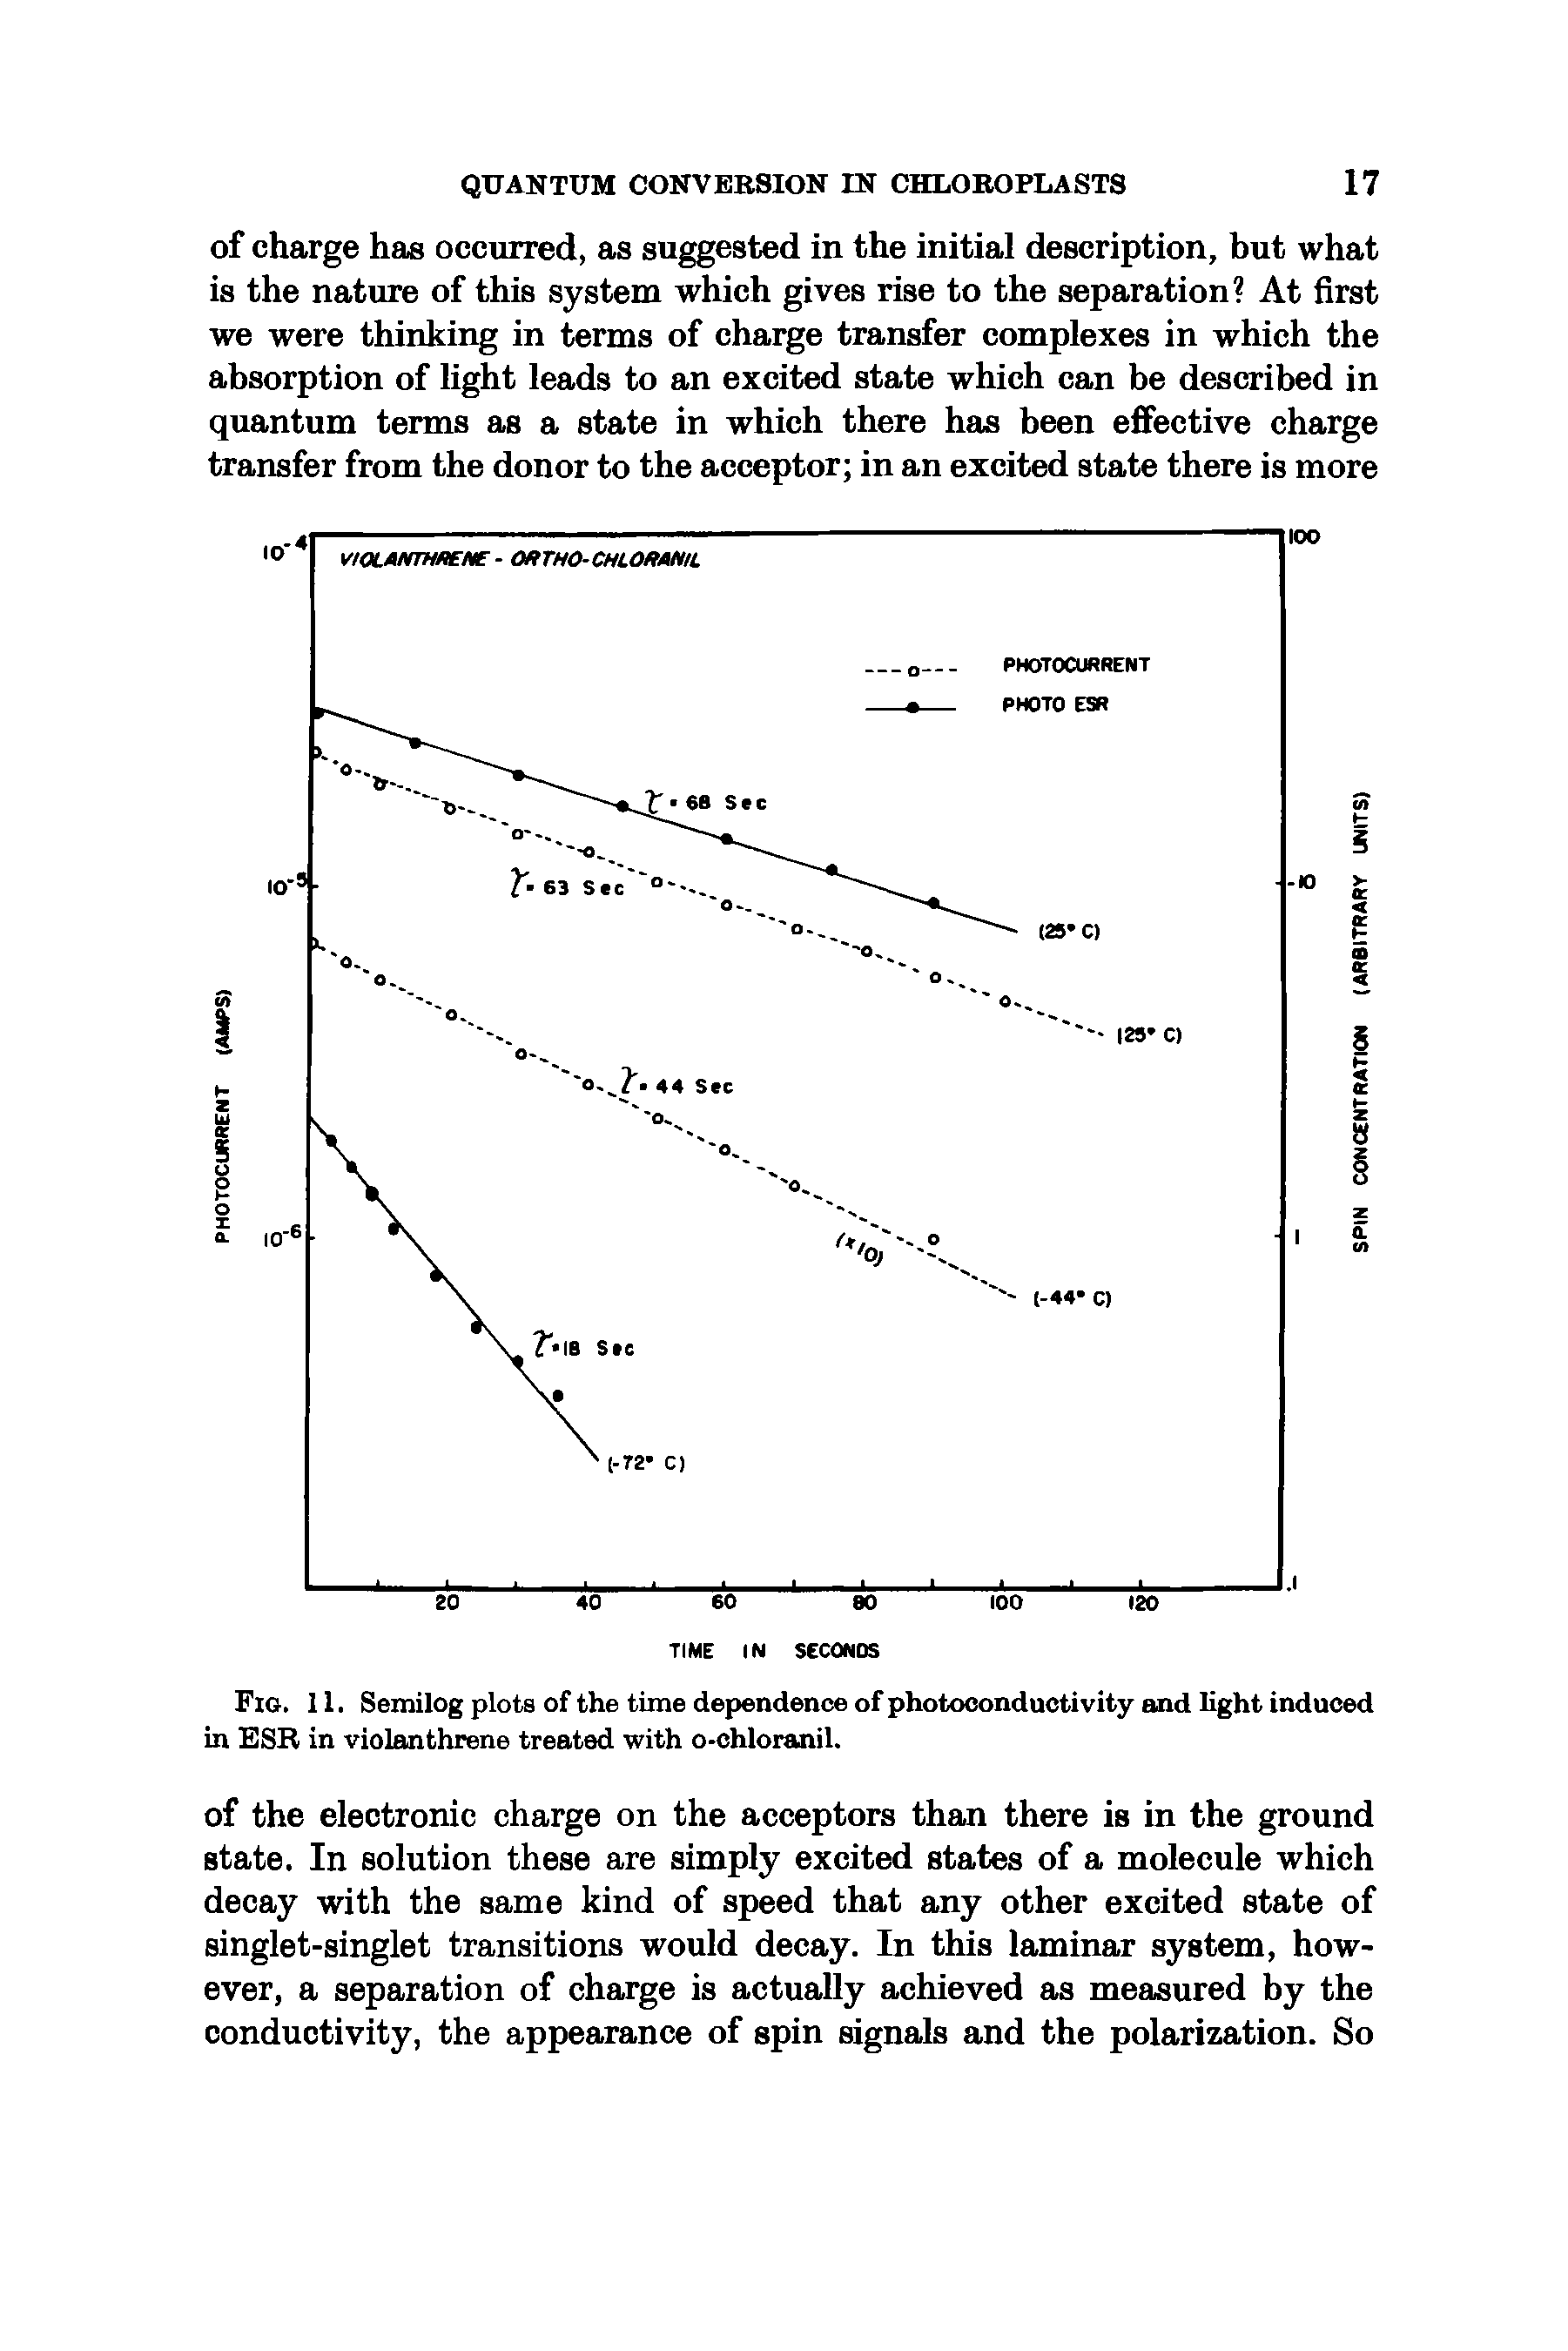 Fig. 11. Semilog plots of the time dependence of photoconductivity and light induced in ESR in violanthrene treated with o-chloranil.